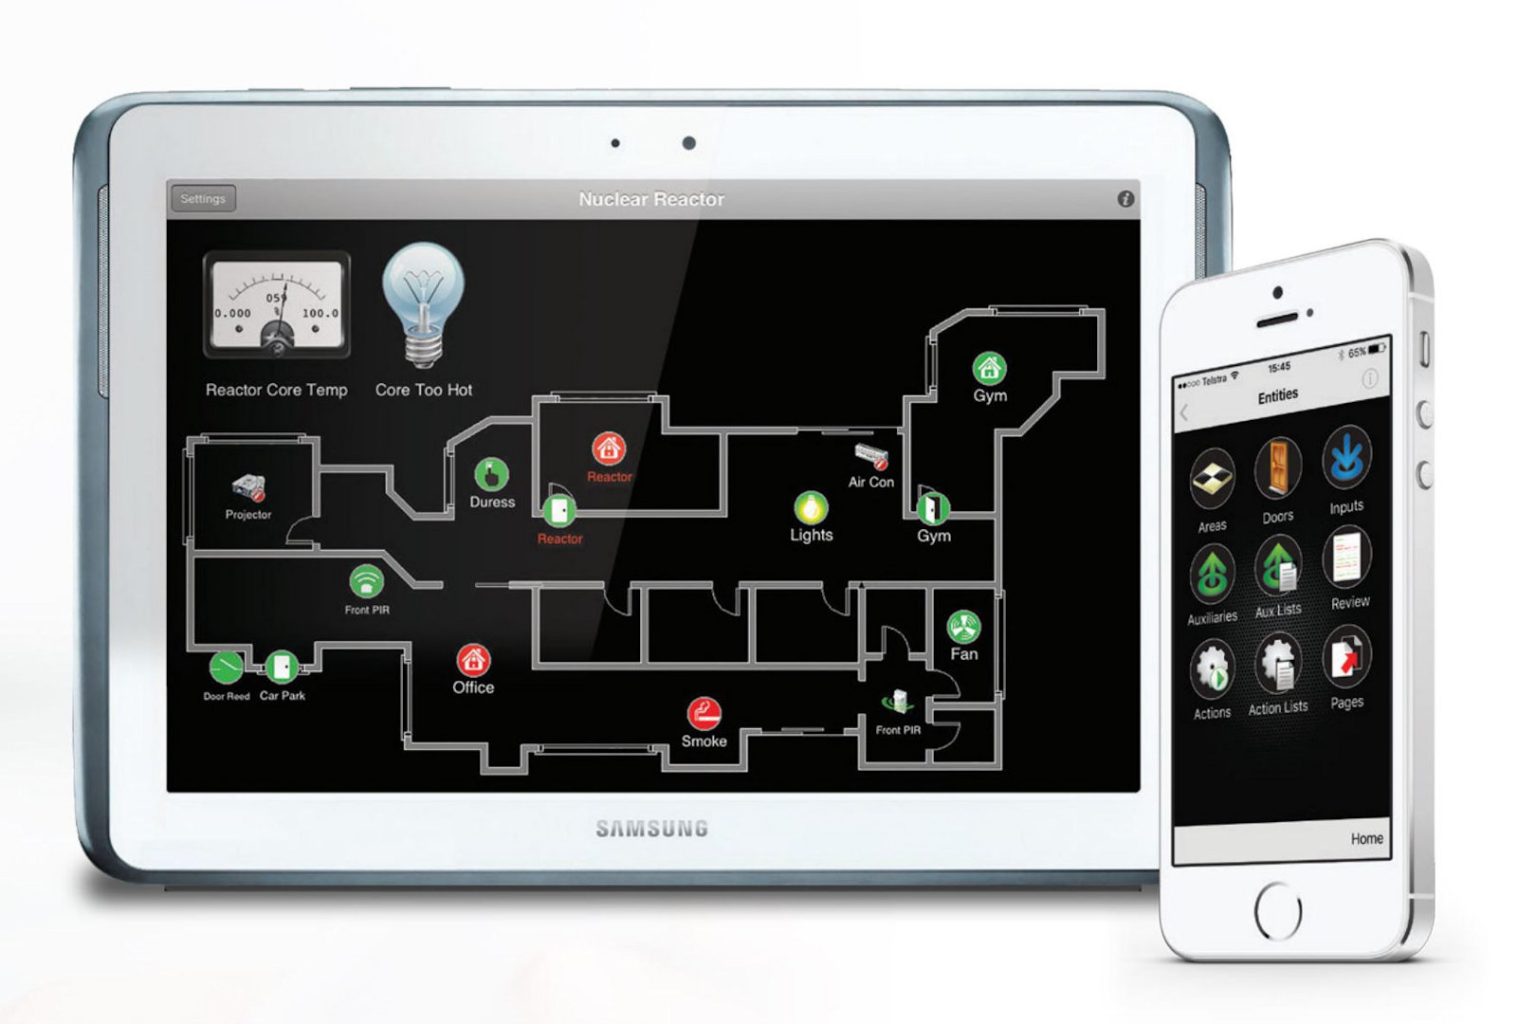 integriti access control software displayed on tablet and phone screen